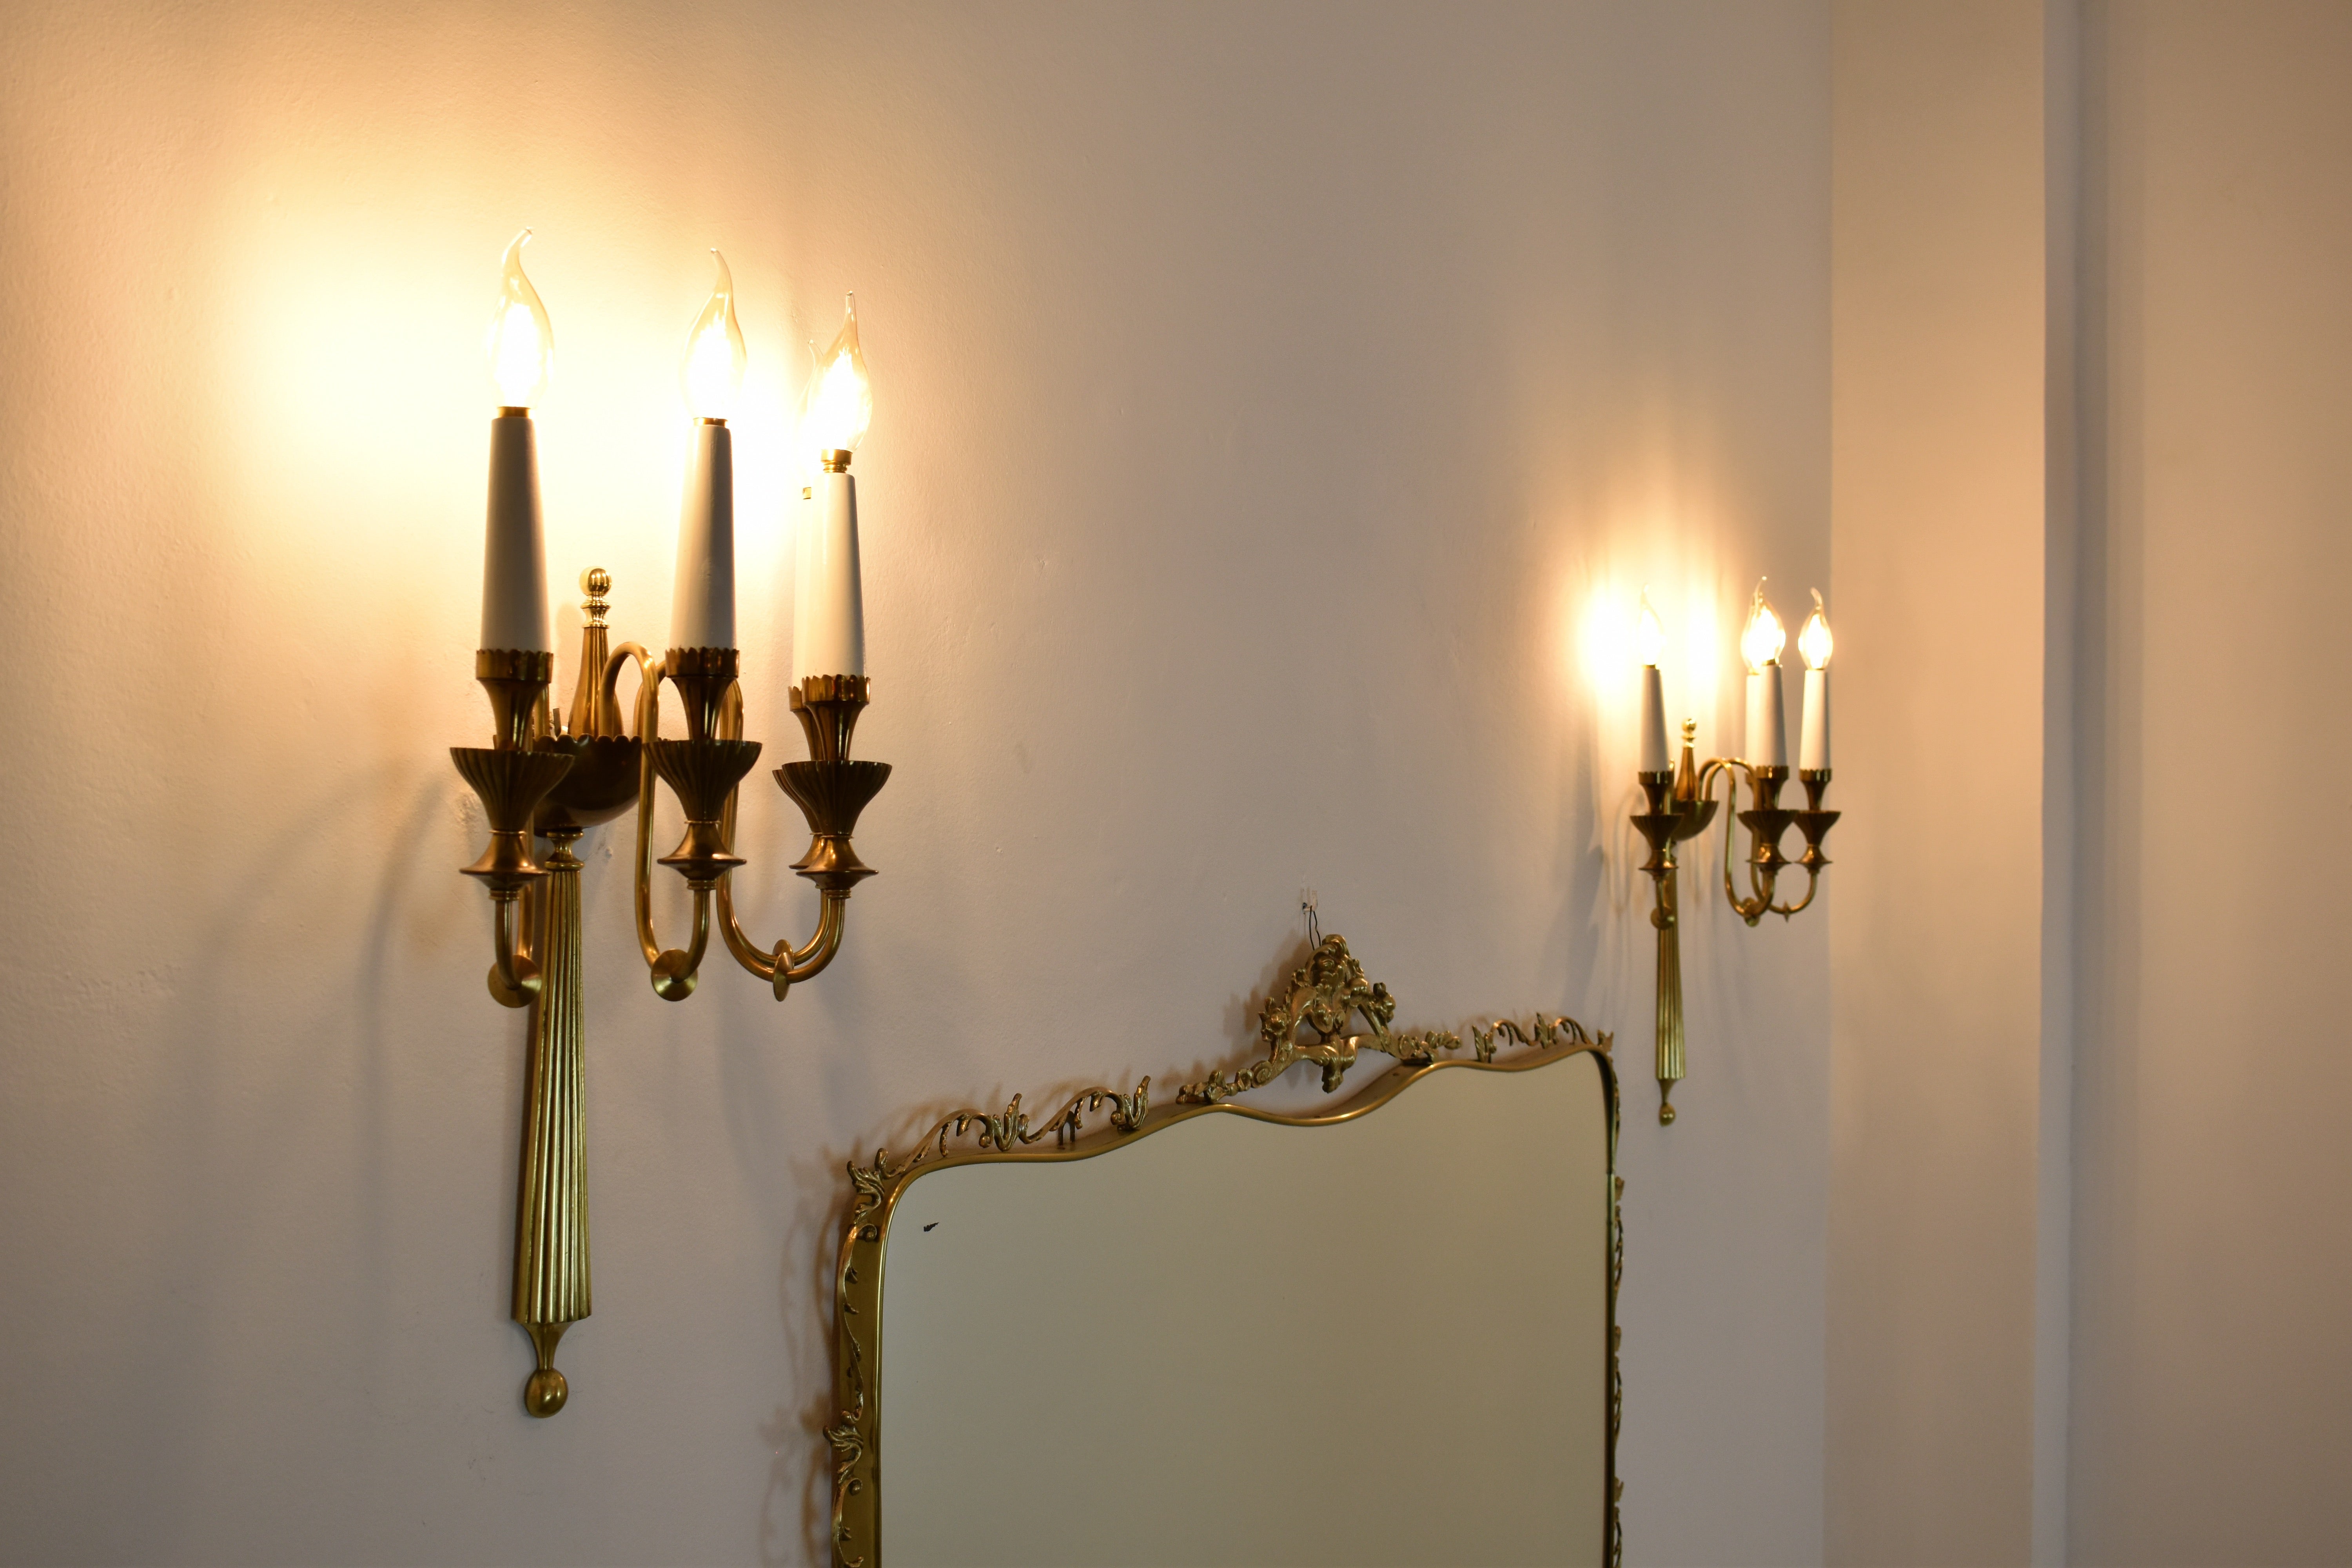 A stunning pair of wall sconces from the 1940s. Handcrafted in Italy and designed in the style of Fontana Arte, these brass fixtures feature a sophisticated structure with four lights. Fit e14 bulbs. 
--------------

Our Gallery
Spirit Gallery is a